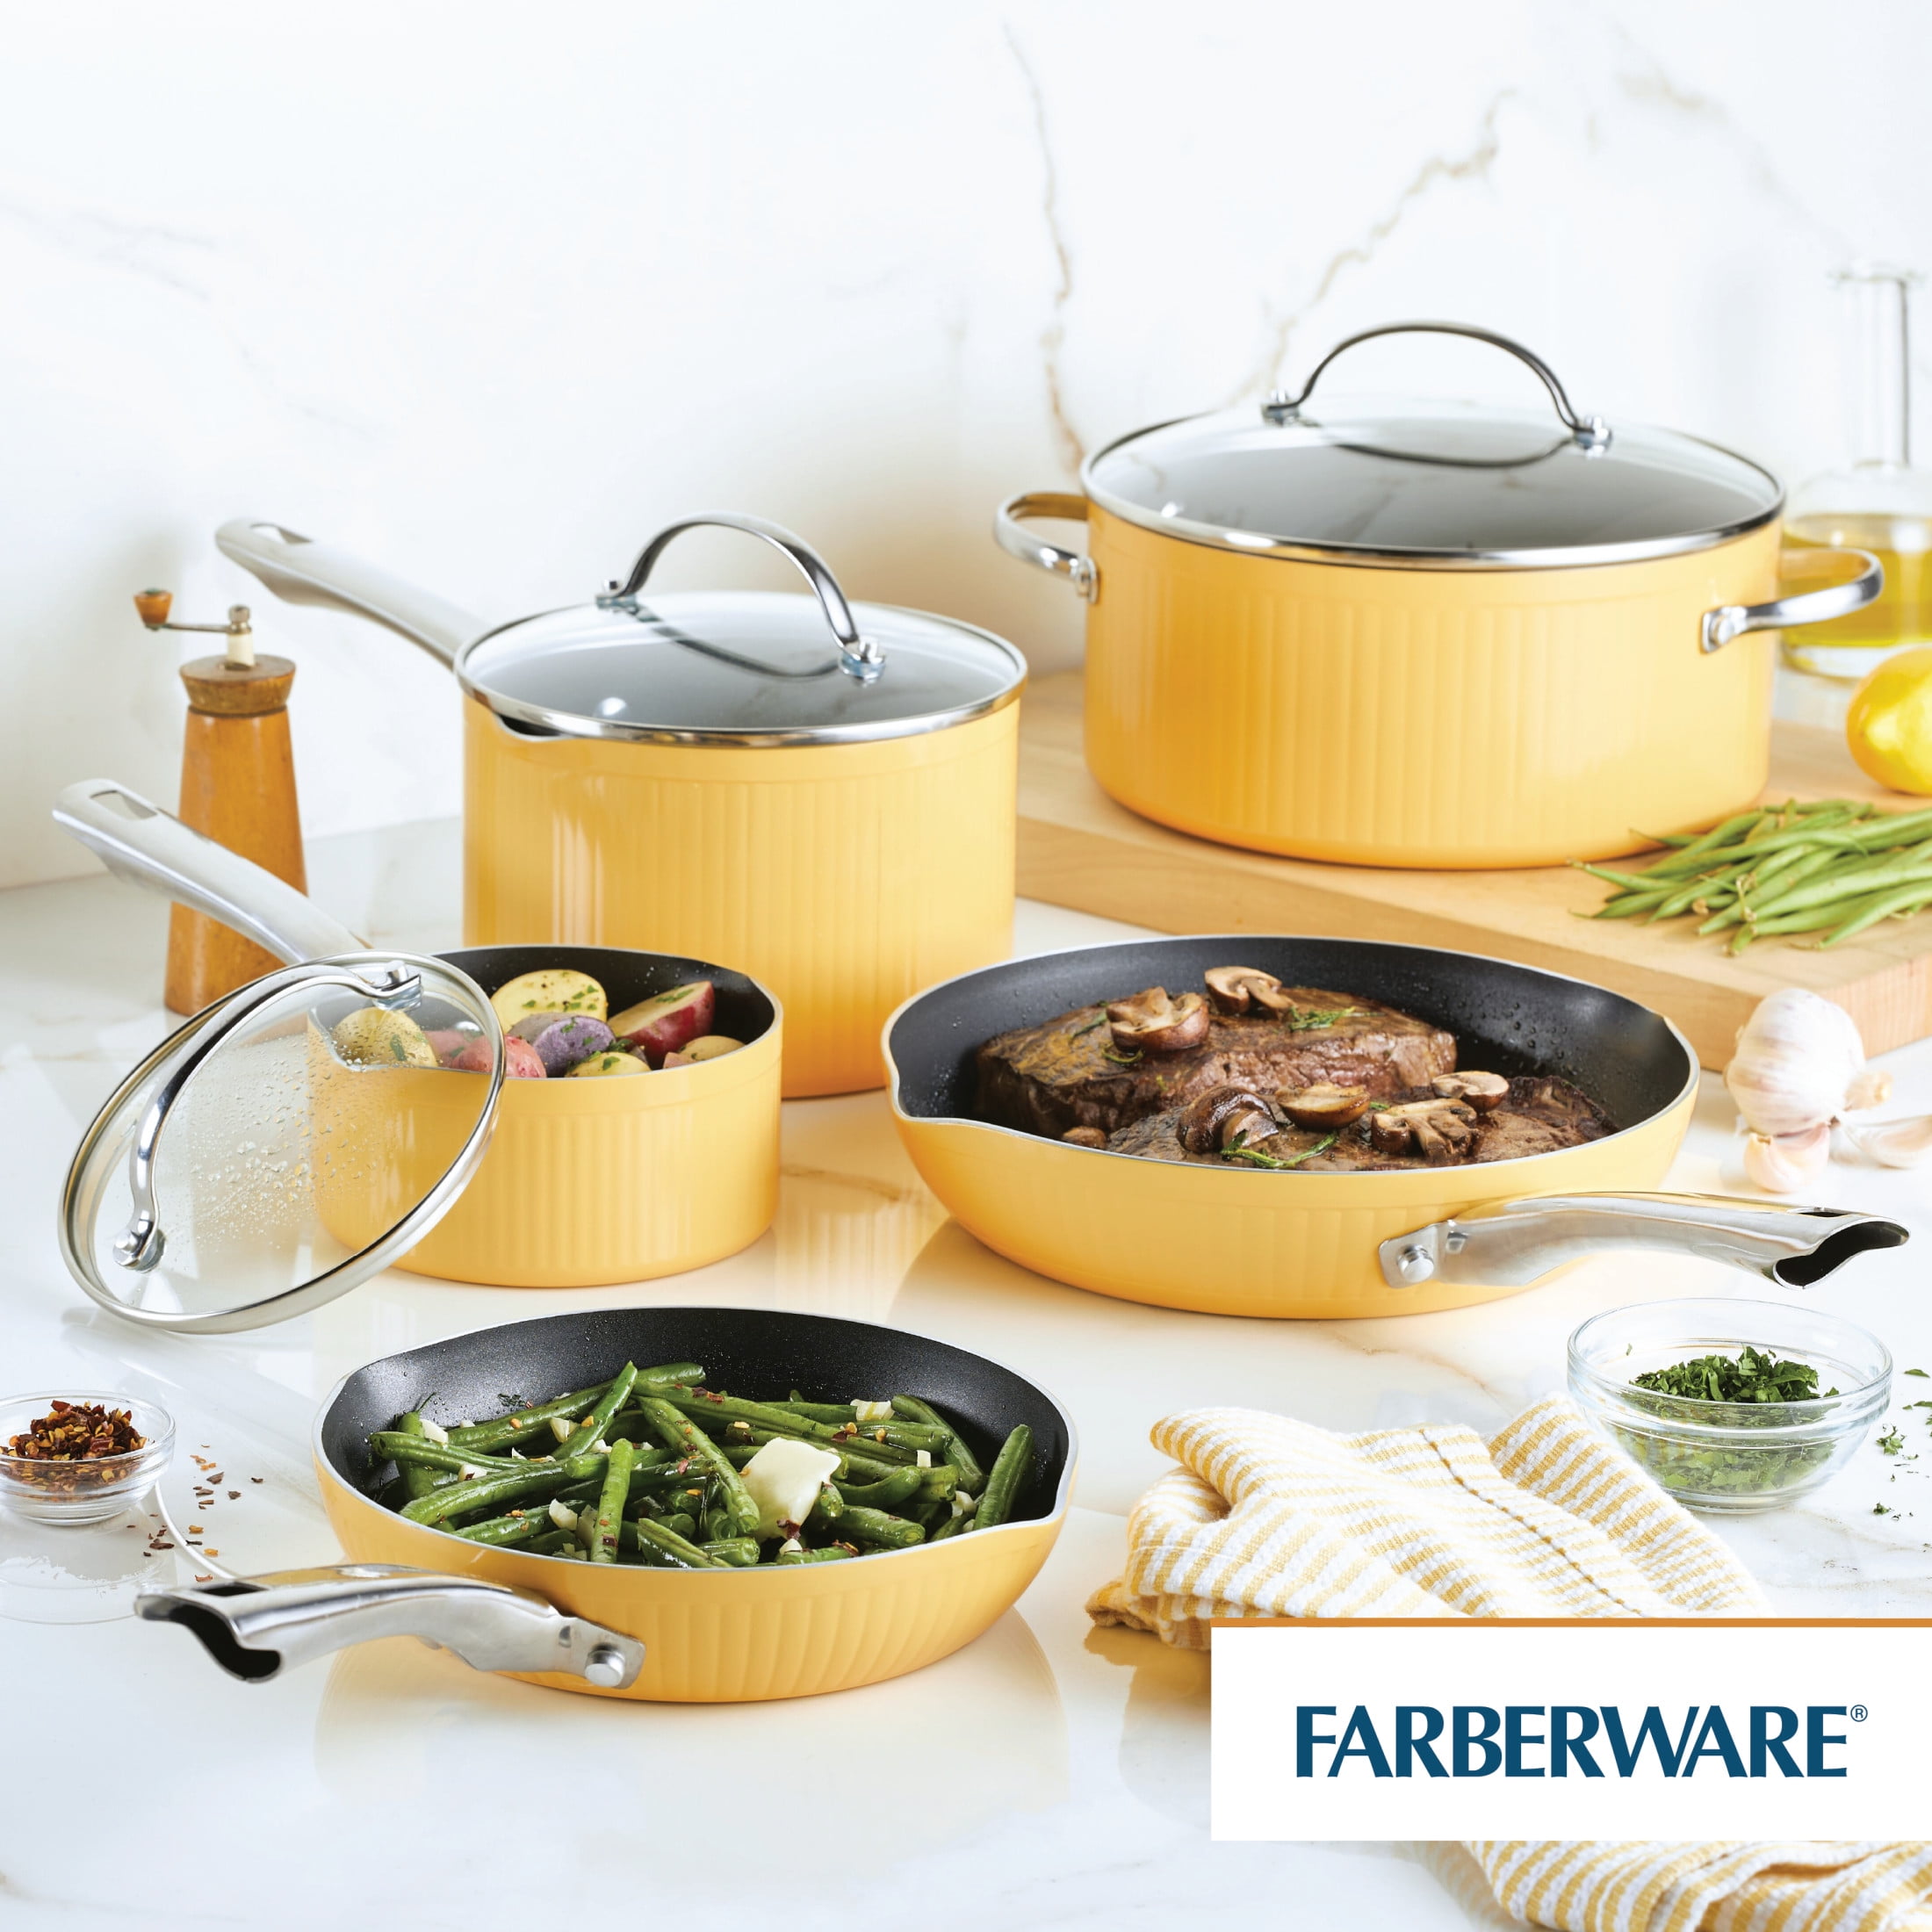 Farberware Style 10pc Nonstick Cookware Pots And Pans Set - Blue